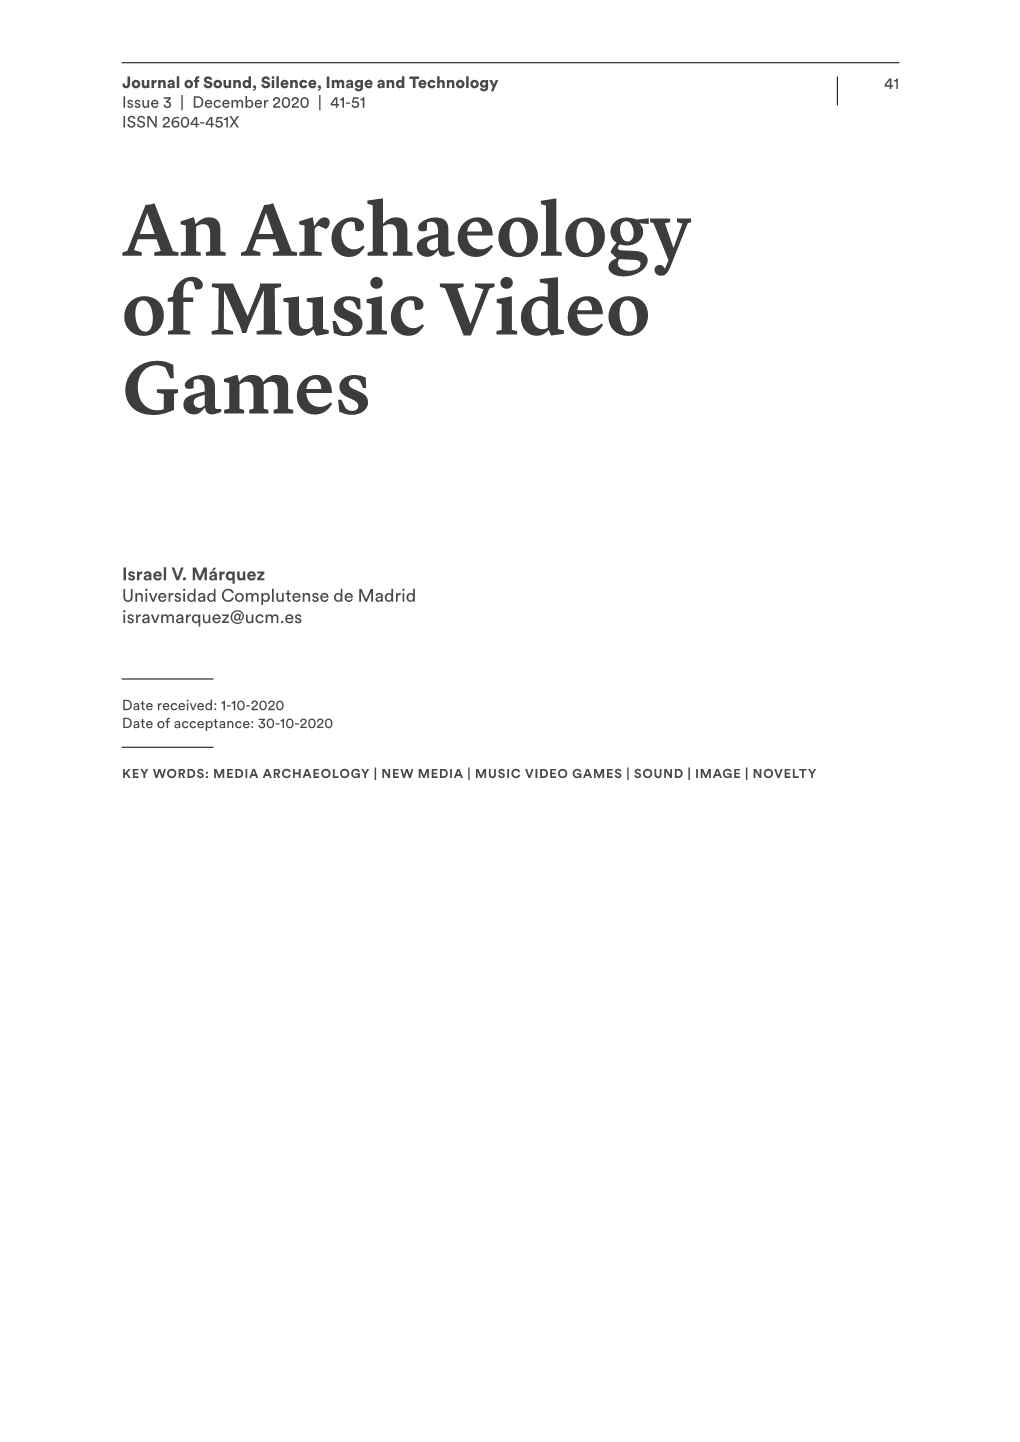 An Archaeology of Music Video Games